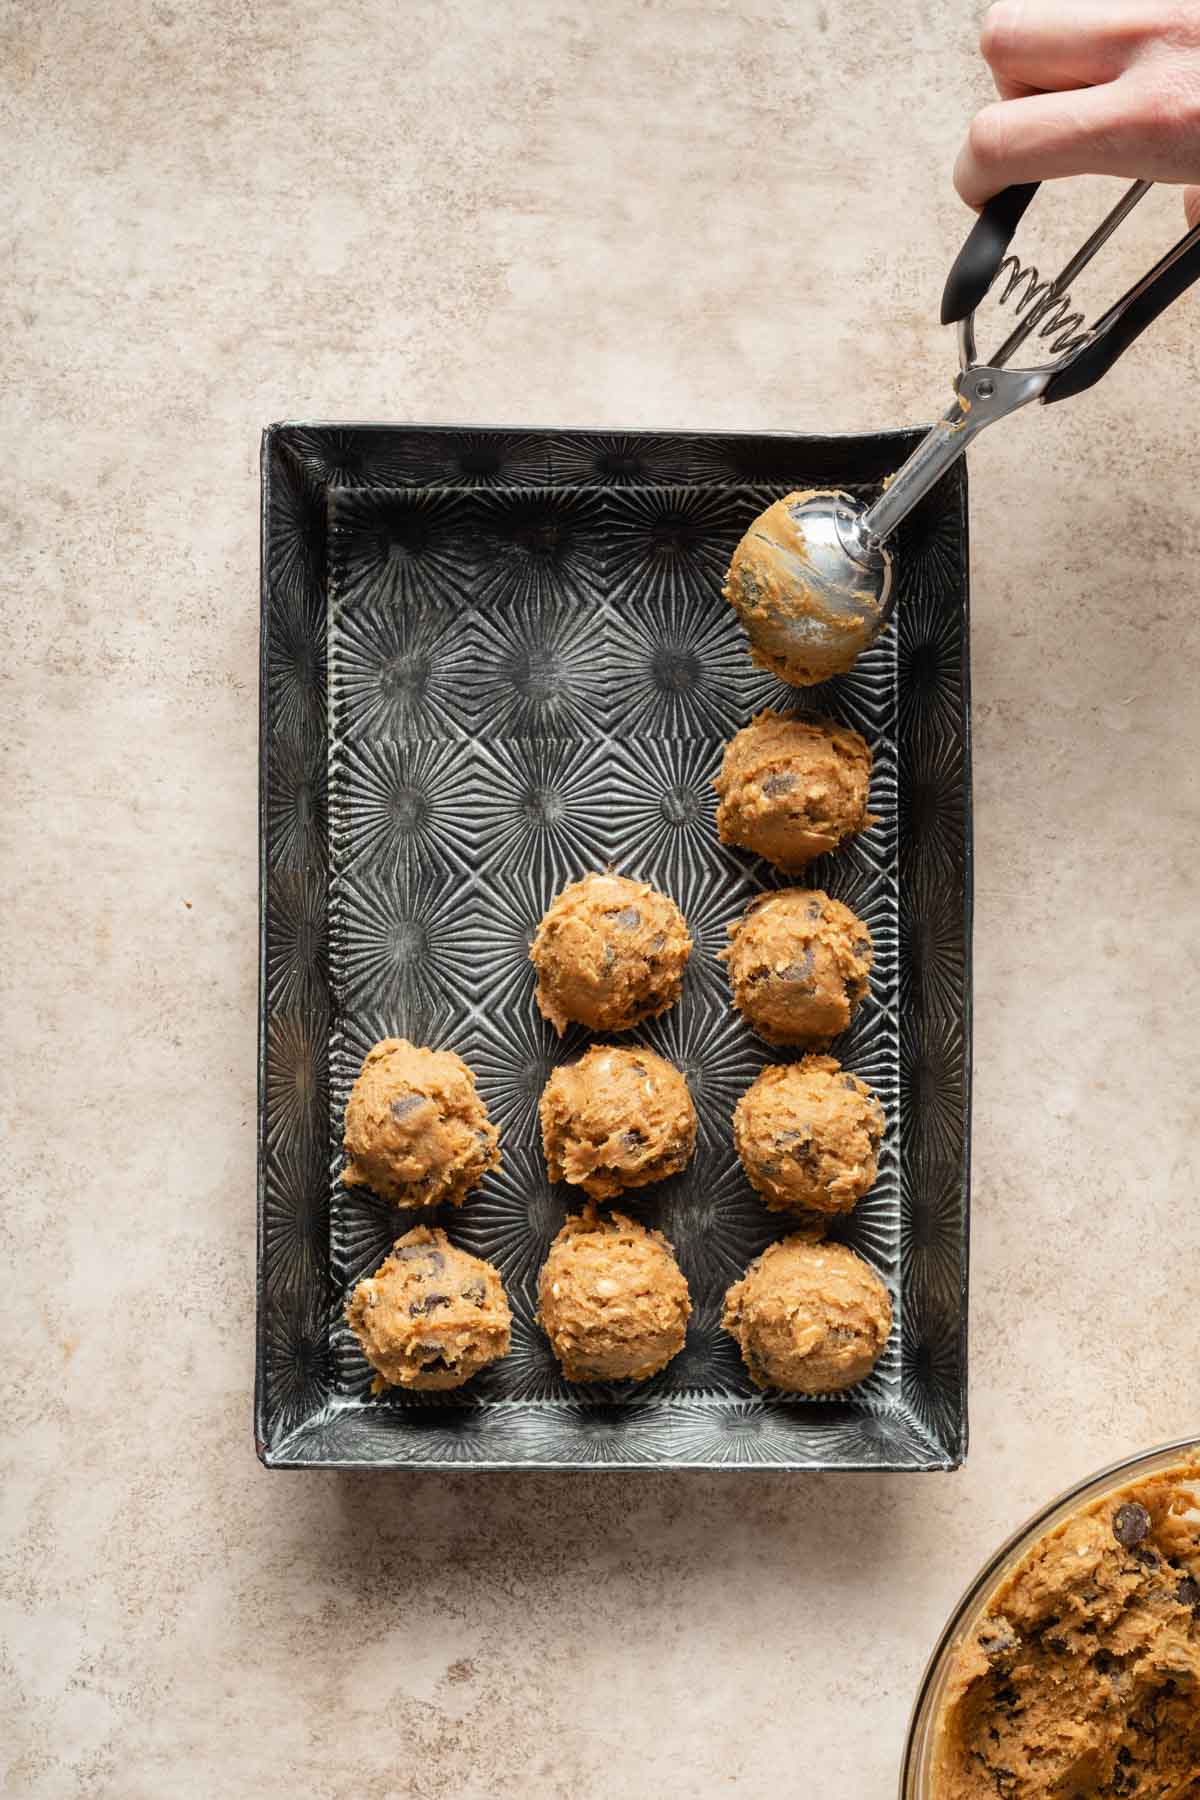 Cookie dough balls being scooped onto a tray.